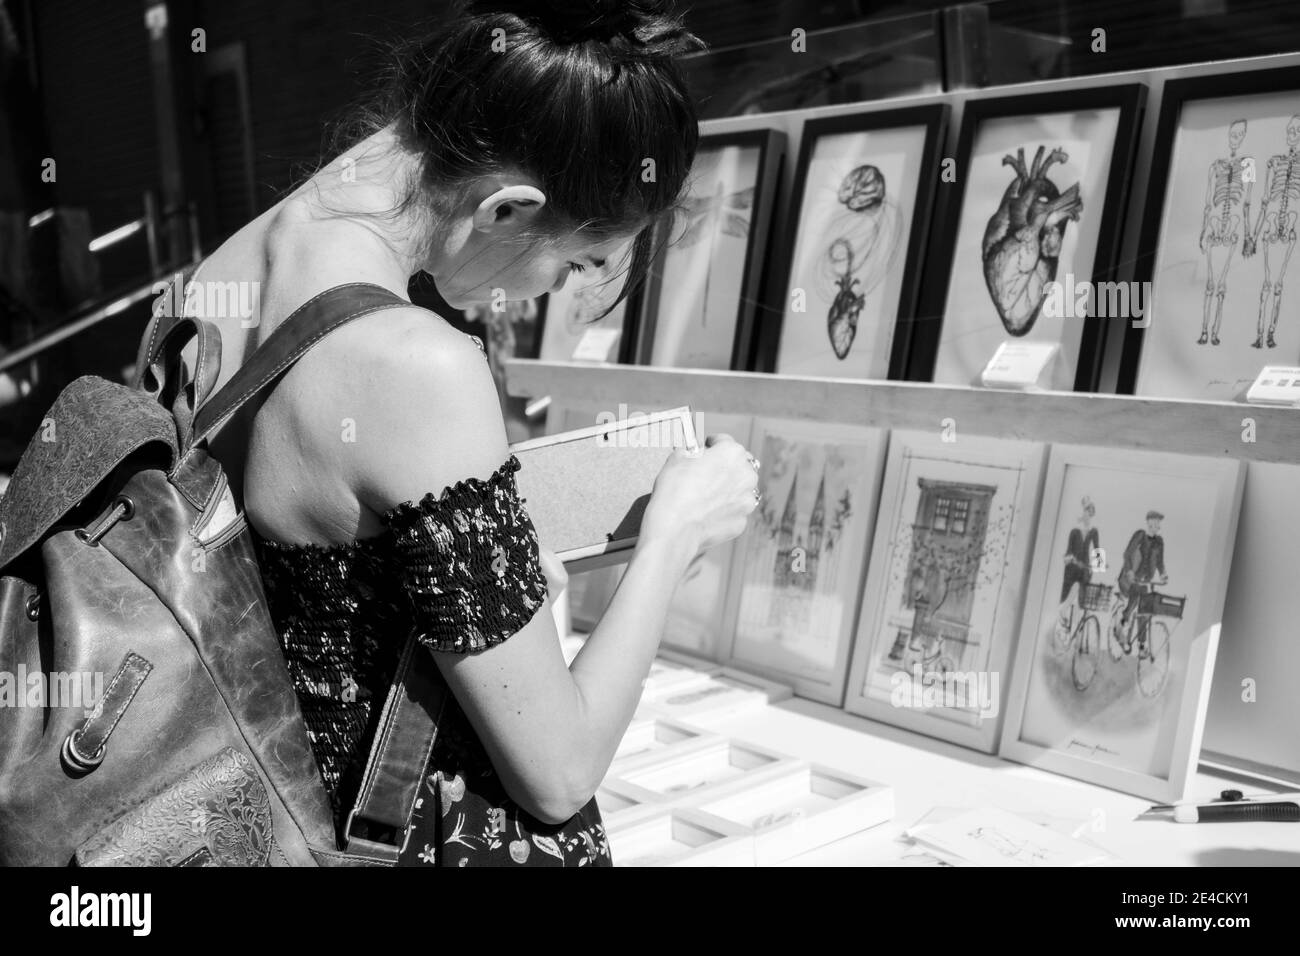 São Paulo / São Paulo / Brazil - 08 19 2018: Pretty exotic tropical woman choosing a drawing or a painting to buy at a market place. [Black and White] Stock Photo